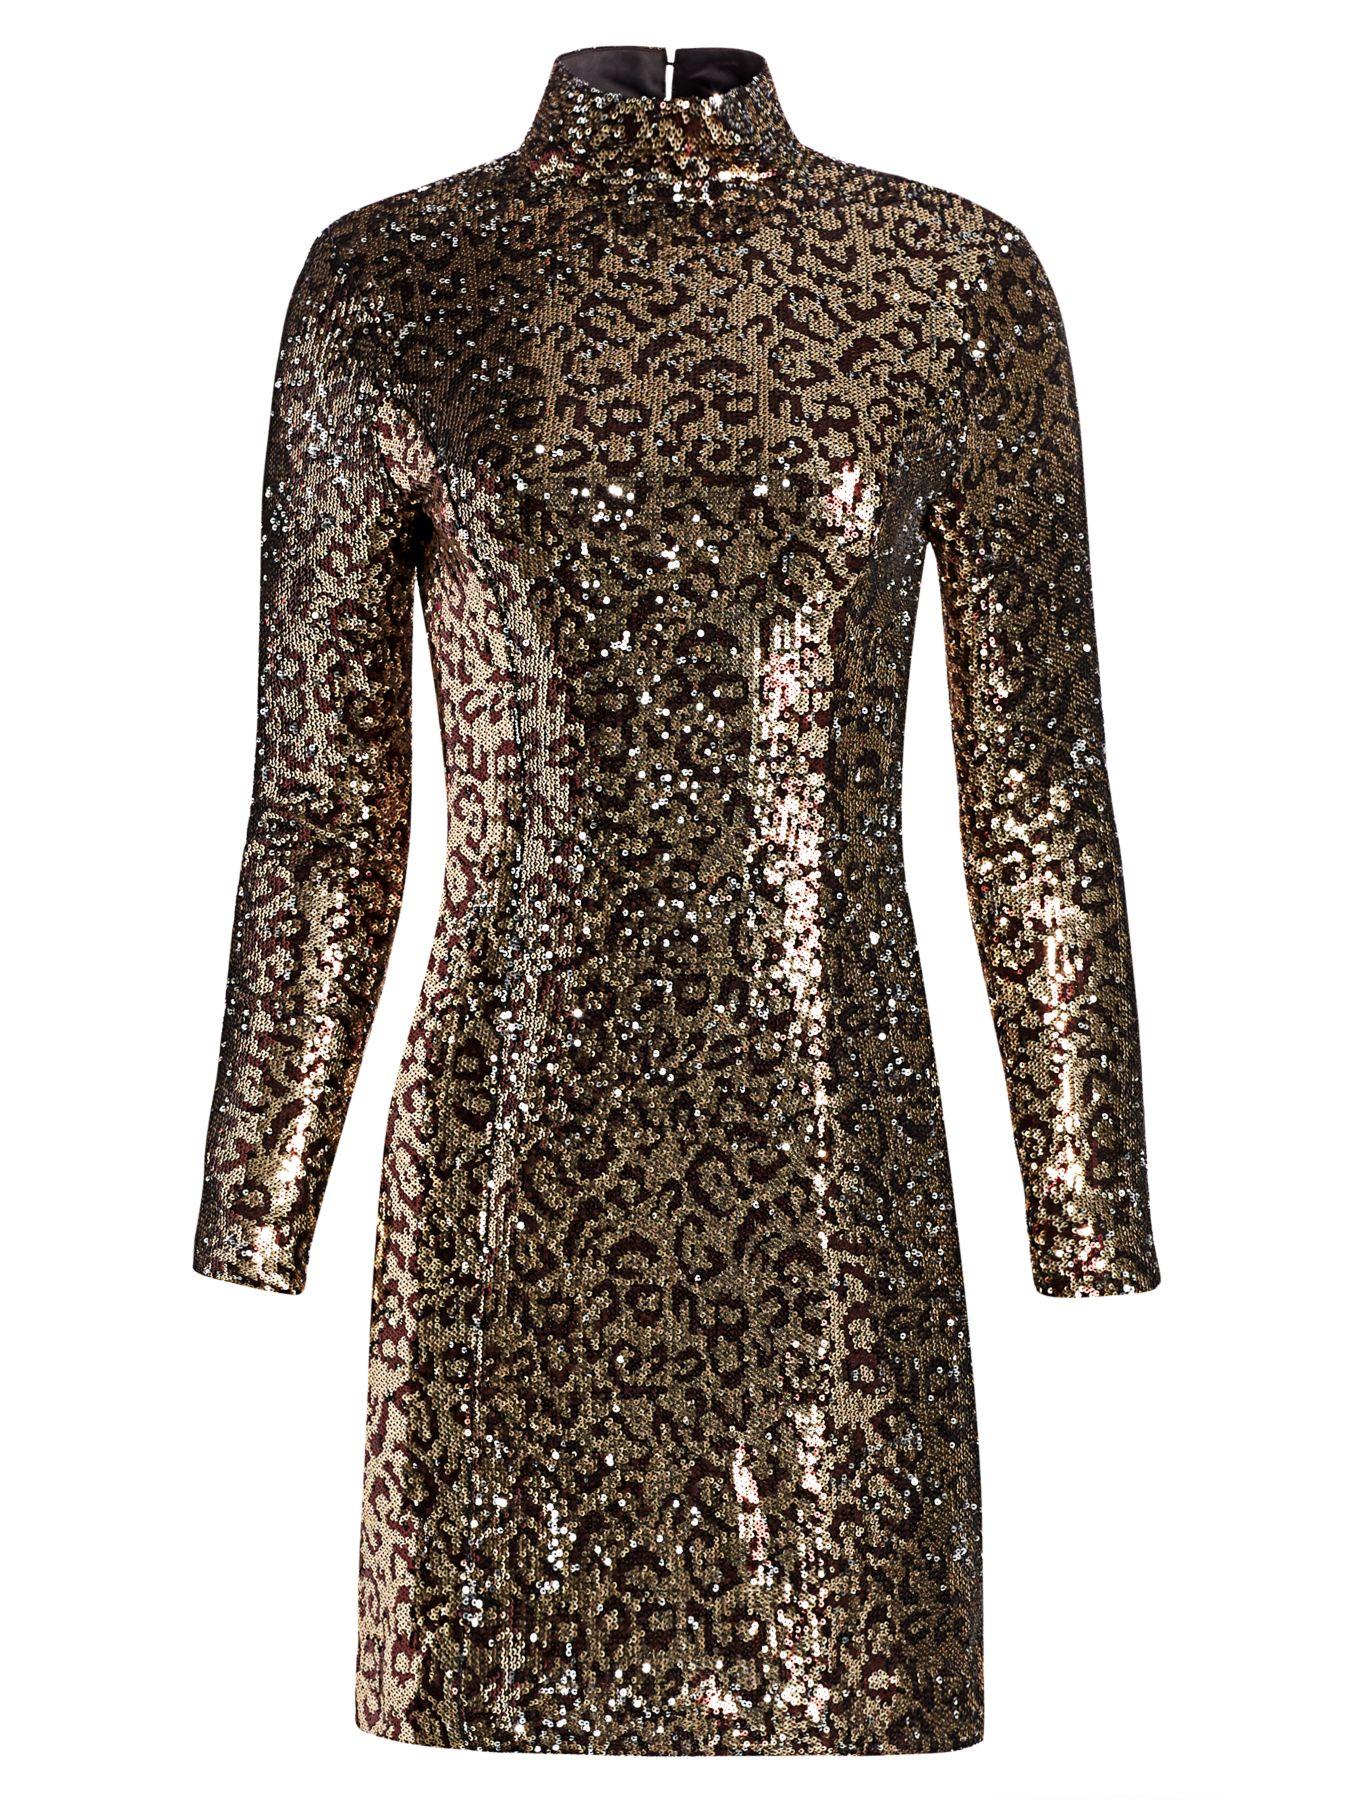 MILLY Synthetic Leopard Sequin Bodycon Mini Dress in Gold Black (Black ...